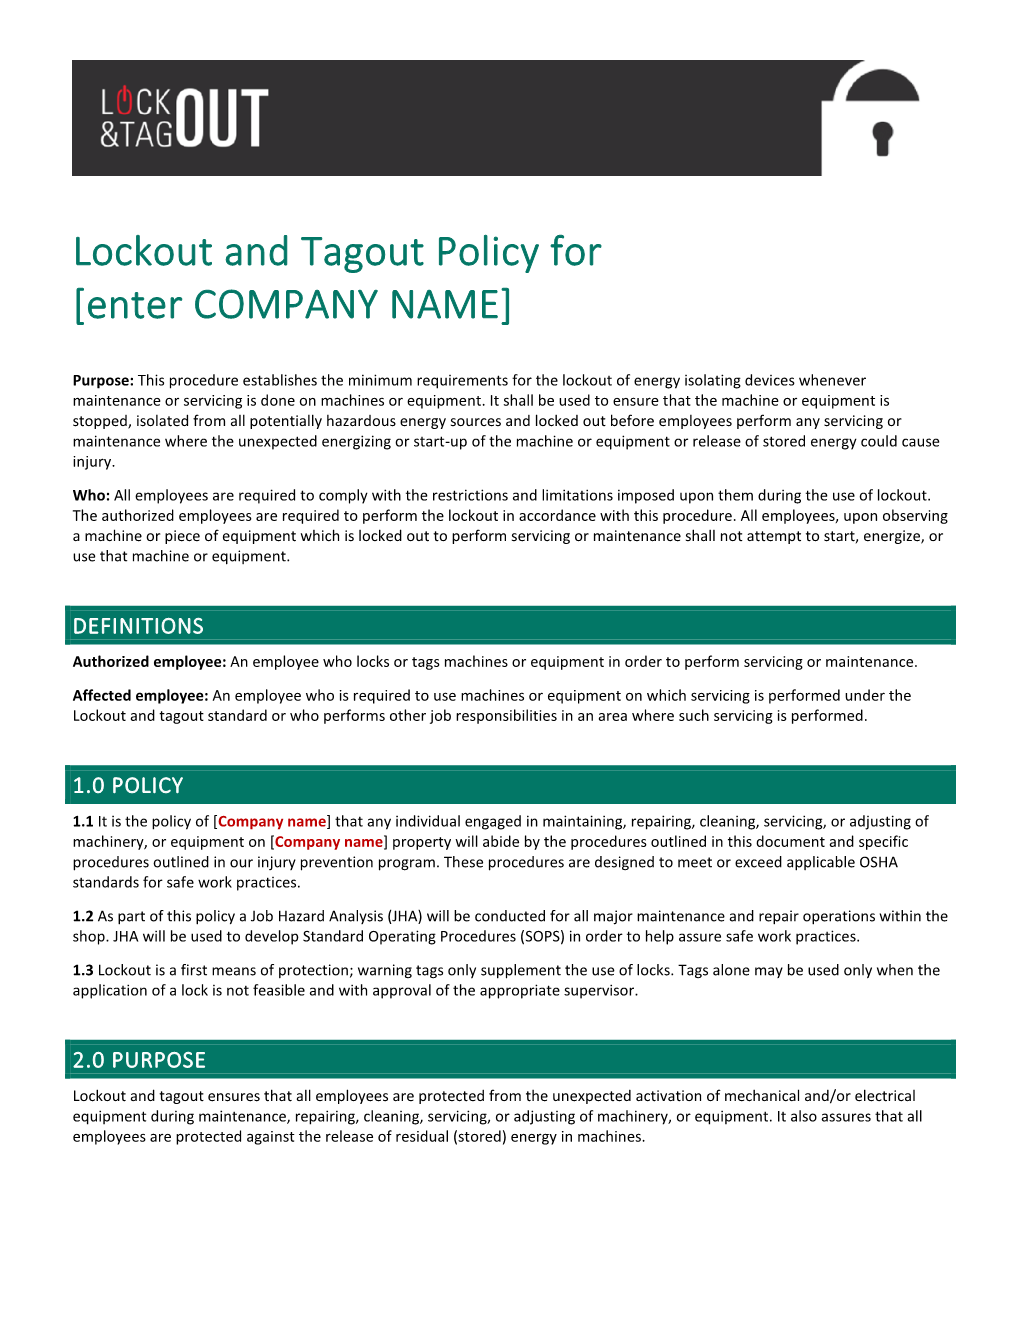 Lockout and Tagout Policy for [Enter COMPANY NAME]